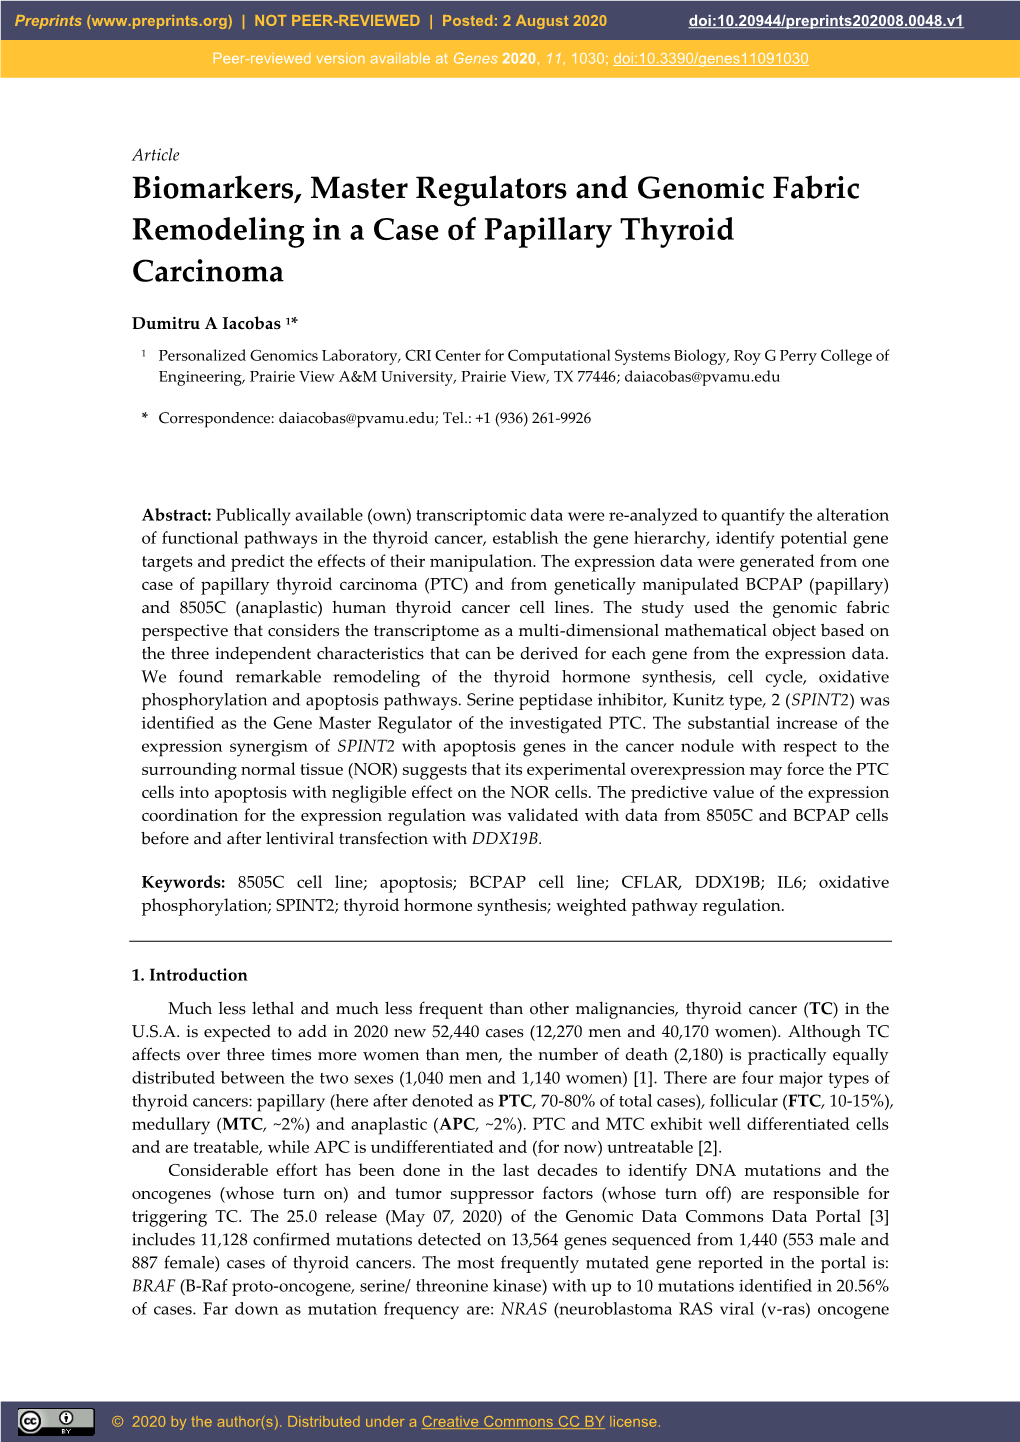 Biomarkers, Master Regulators and Genomic Fabric Remodeling in a Case of Papillary Thyroid Carcinoma